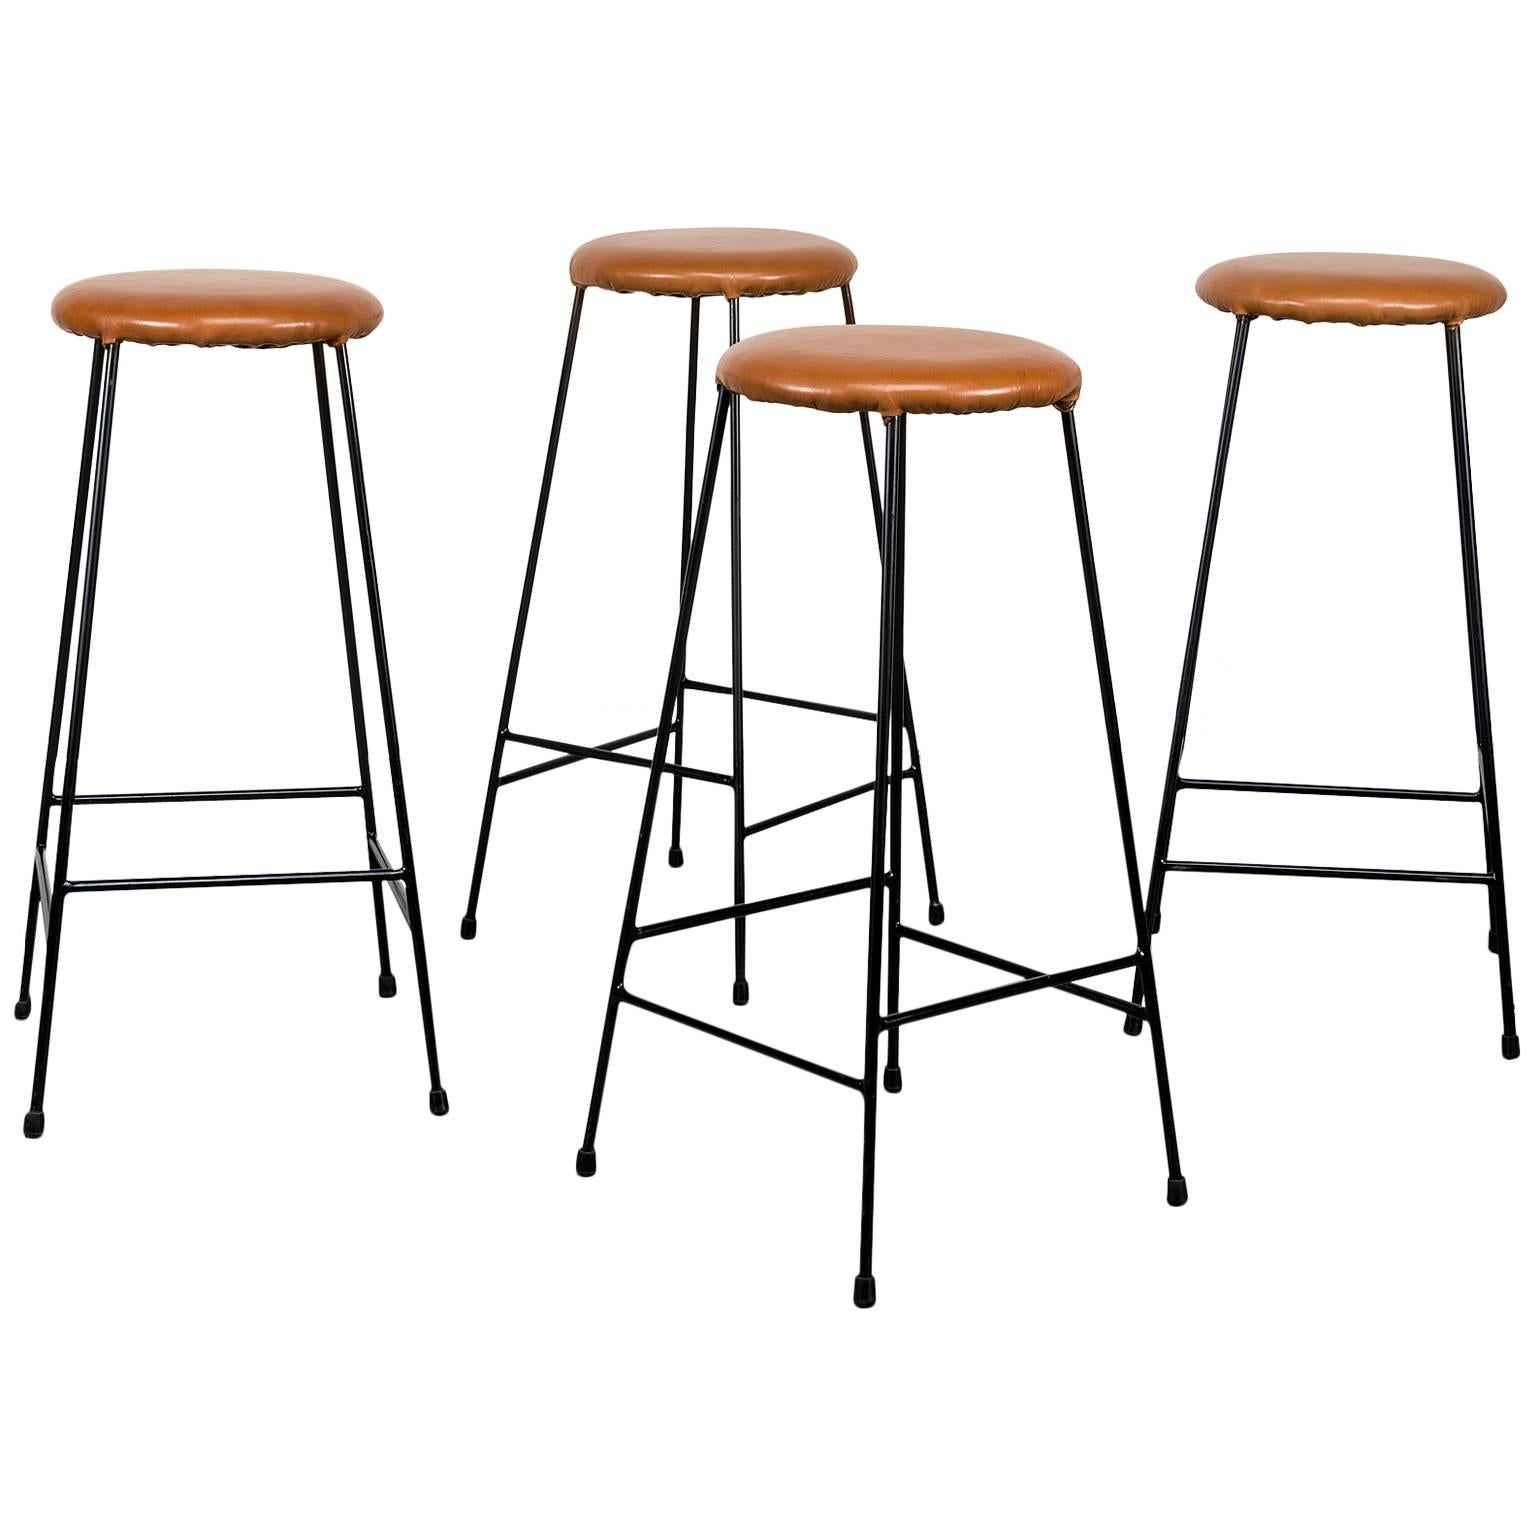 Set of Four Iron Barstools with Caramel Leather Seats, 1960s